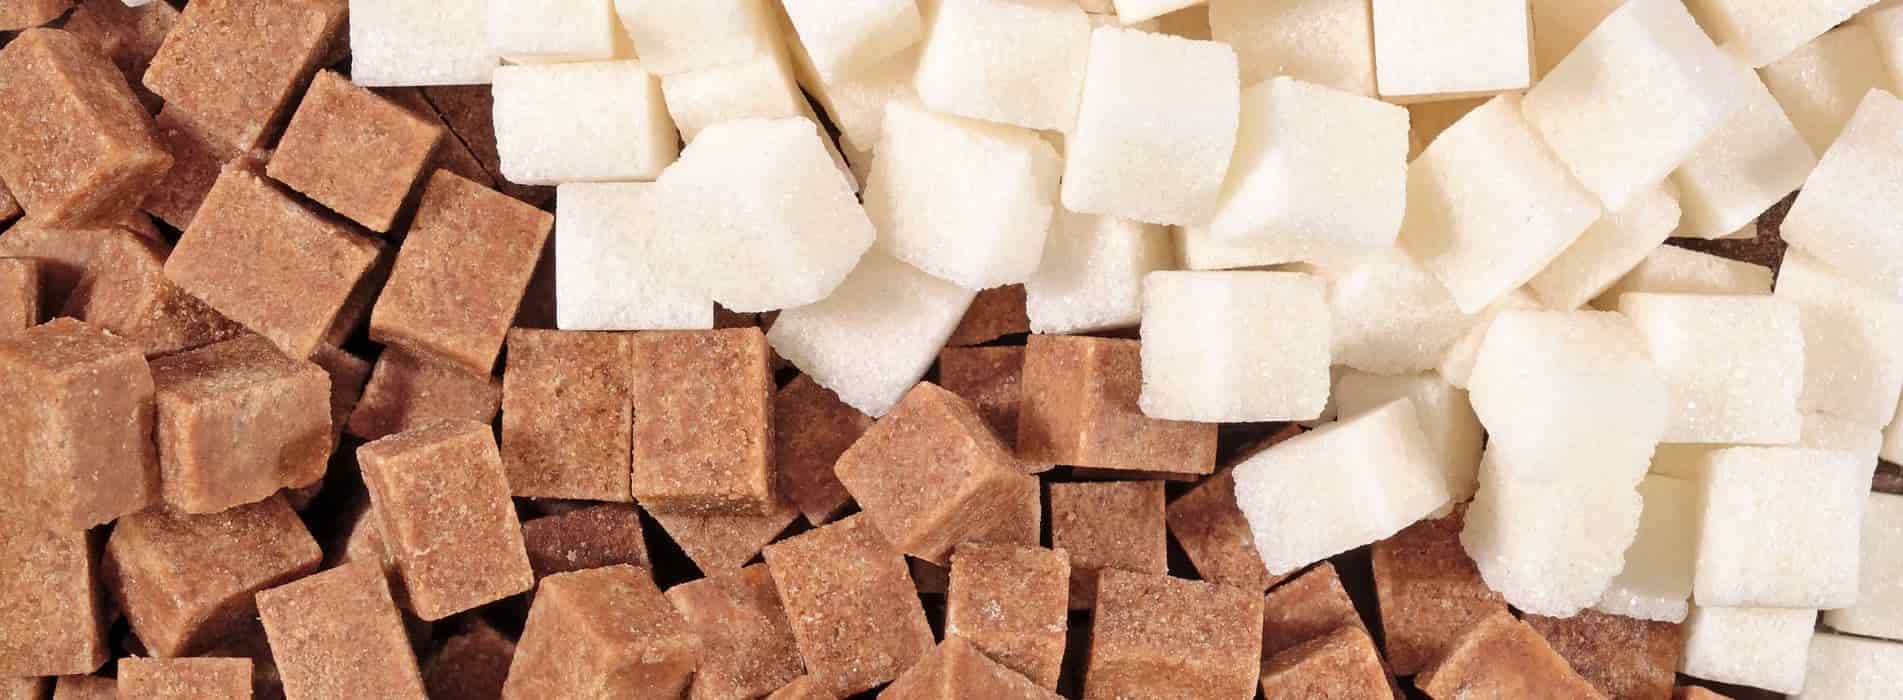 what are the symptoms of sucrose intolerance